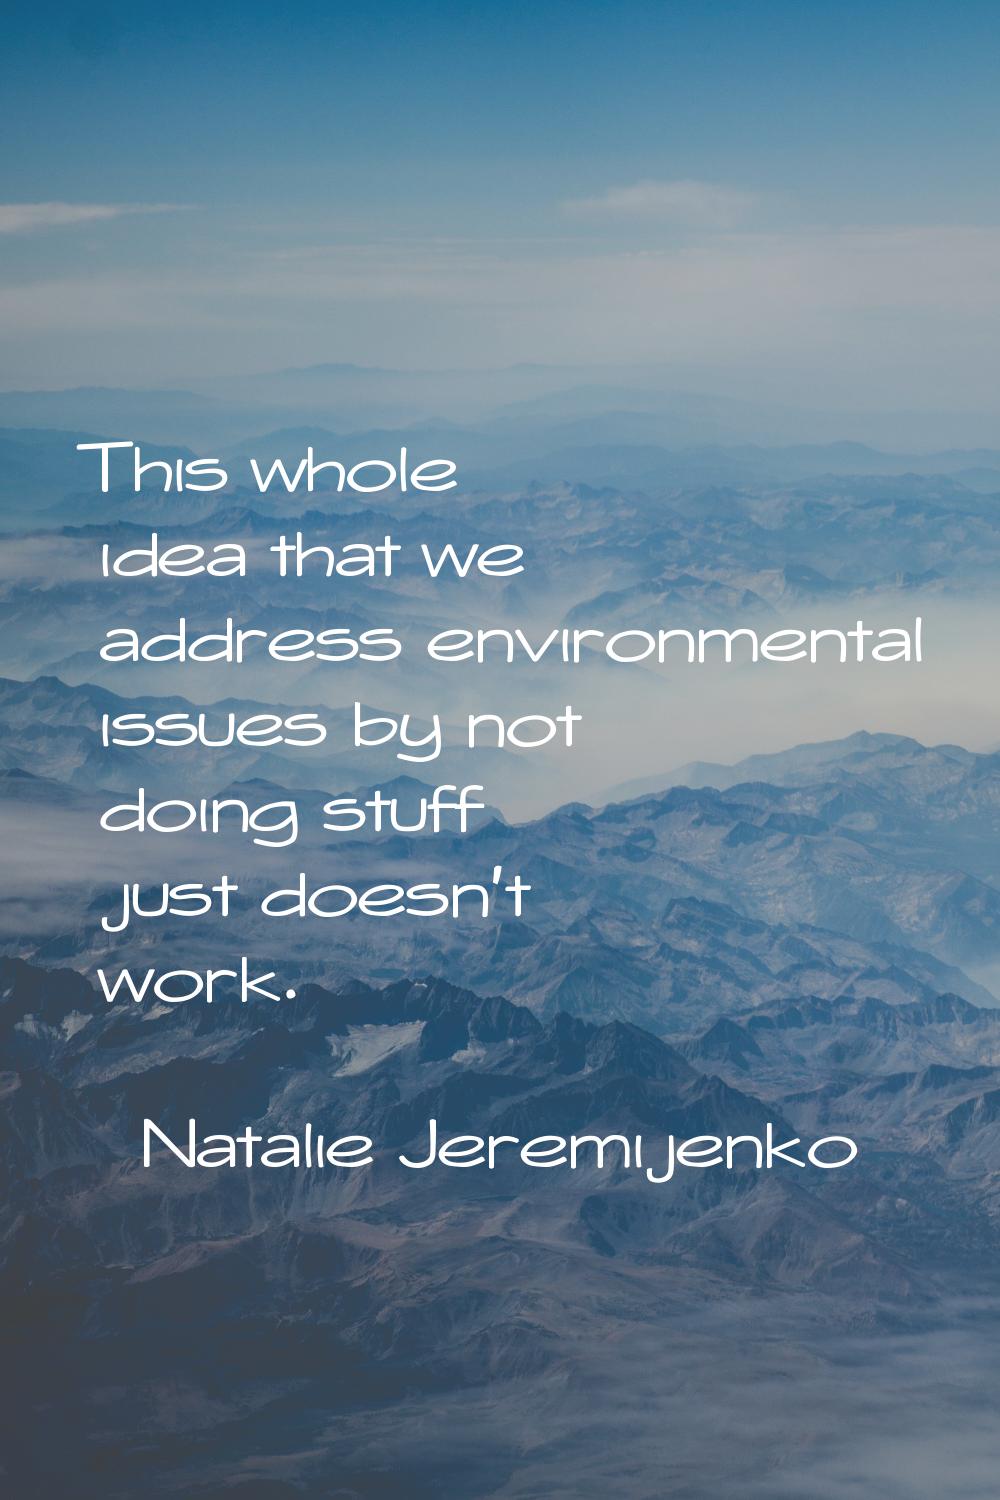 This whole idea that we address environmental issues by not doing stuff just doesn't work.